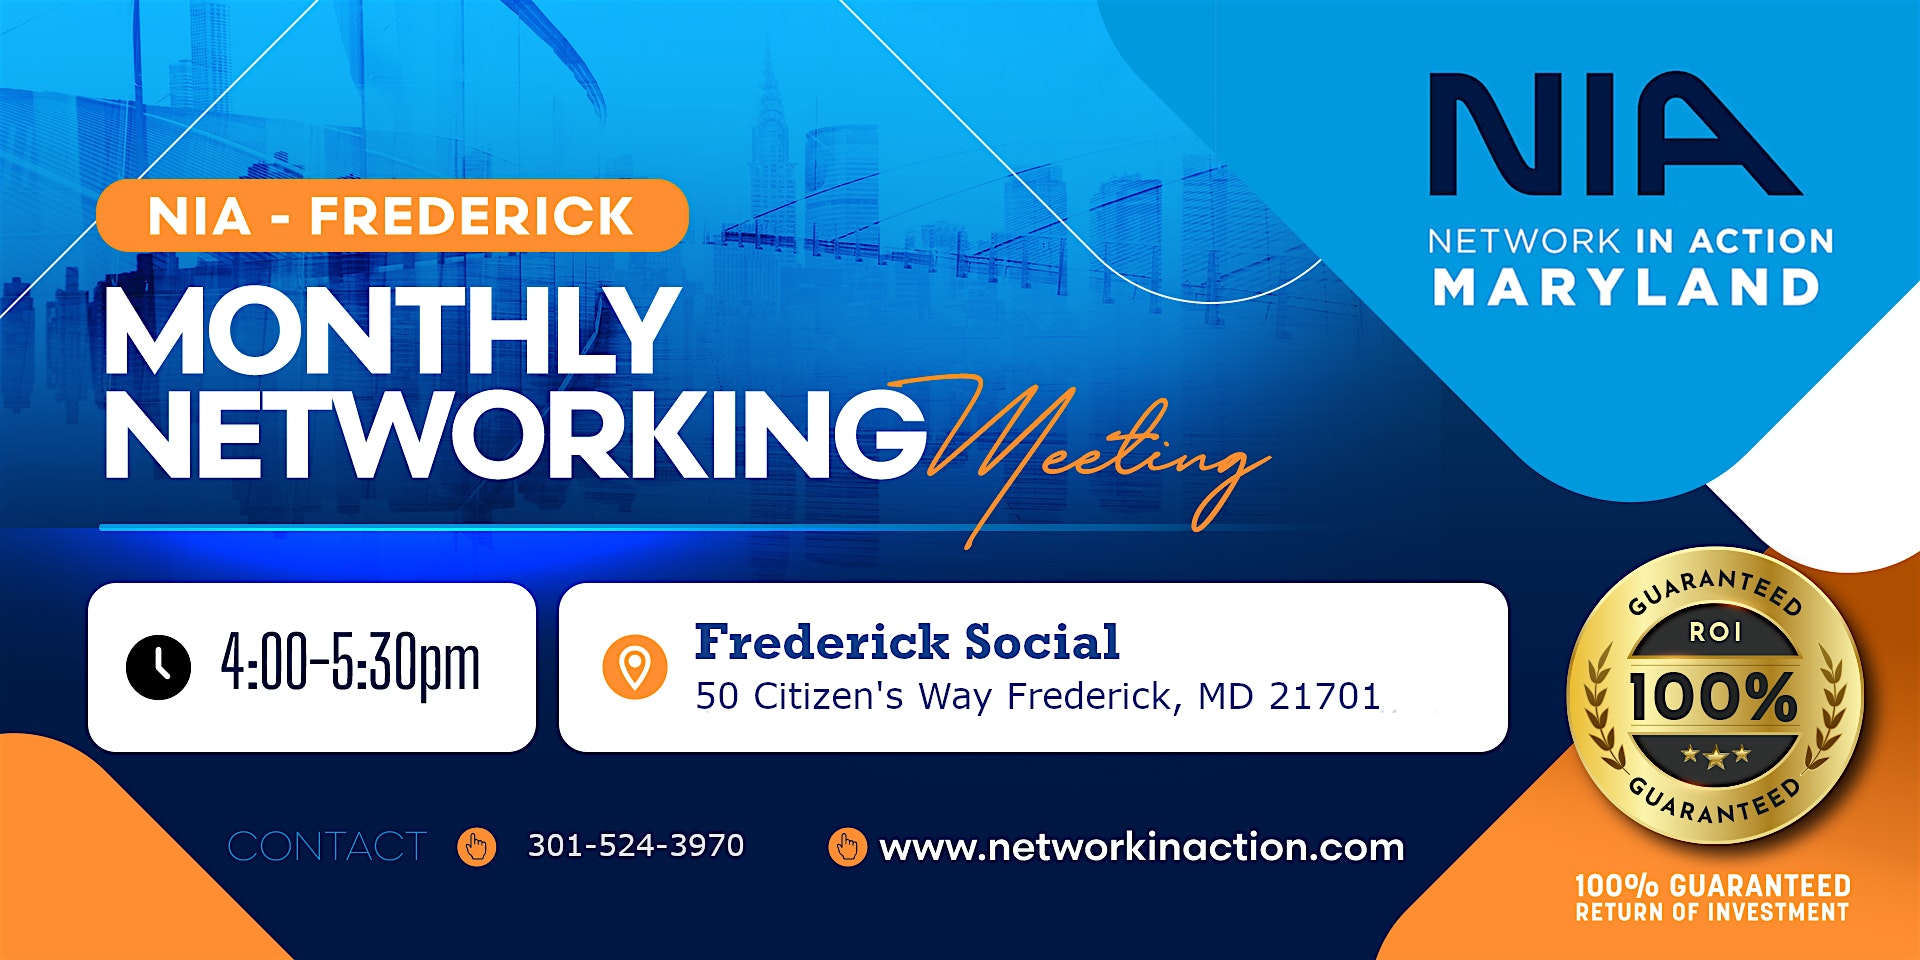 Network In Action - FREDERICK: Monthly Networking Meeting